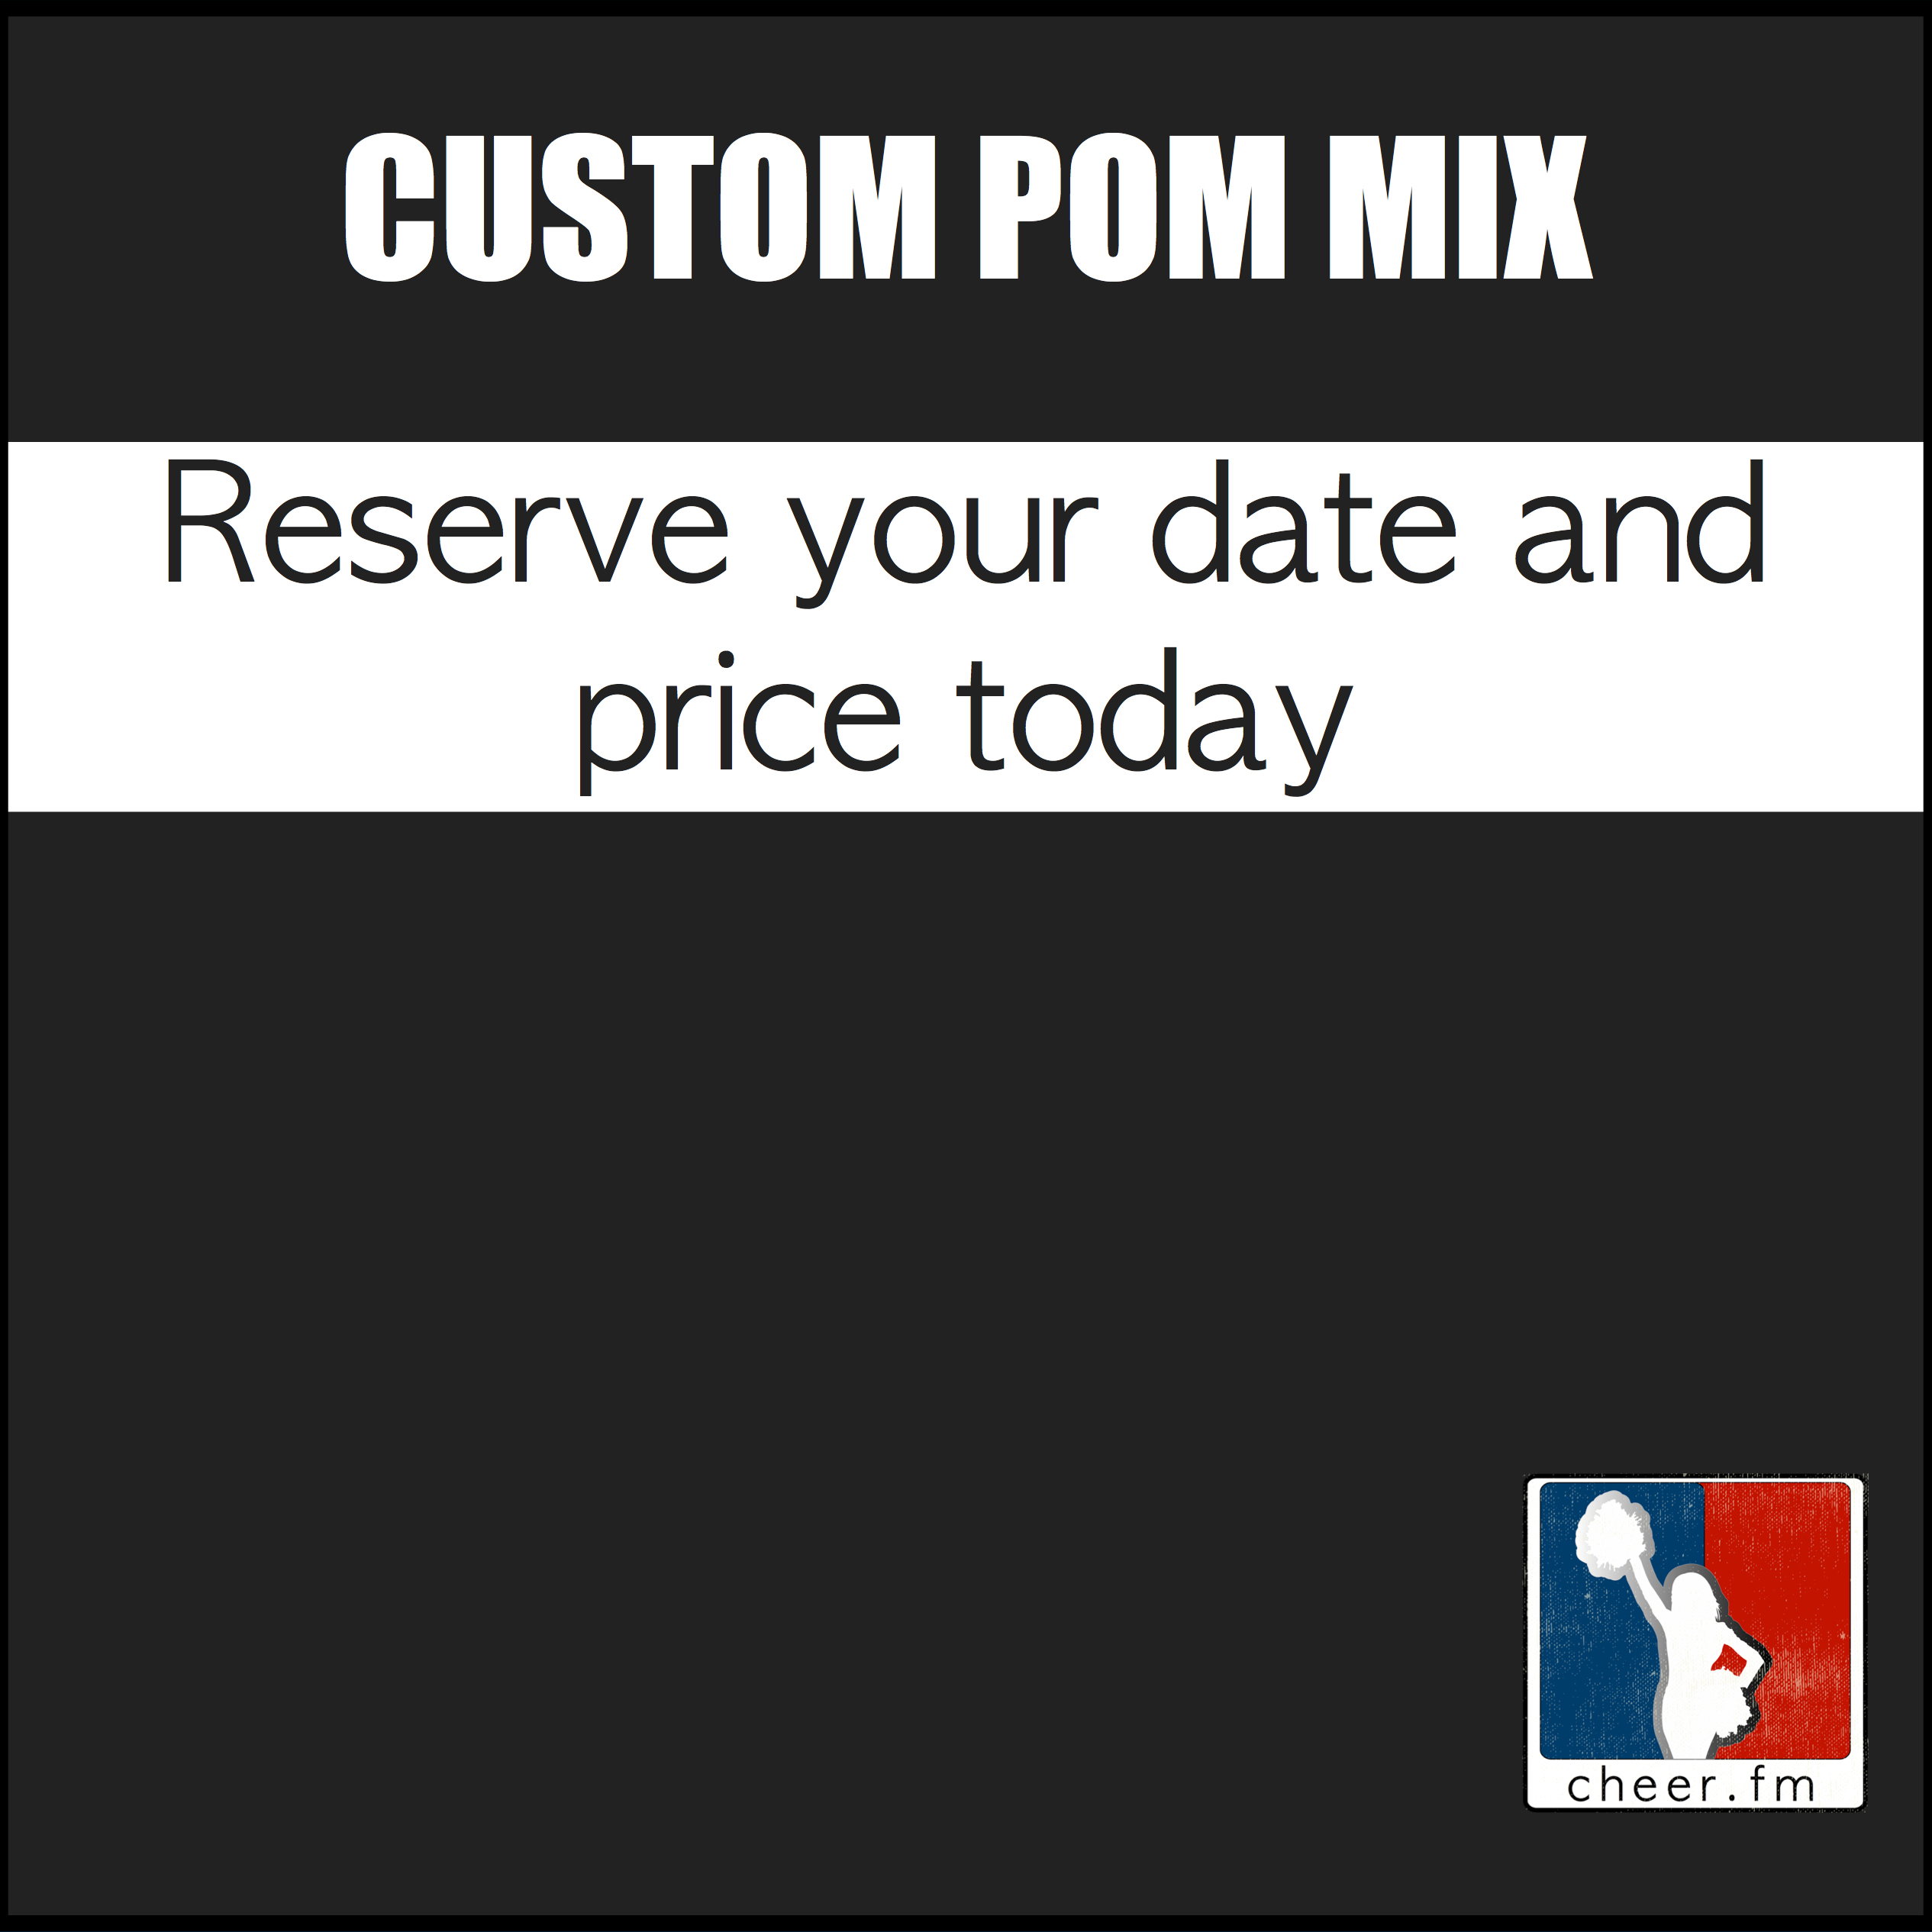 Custom Mix Reservation - Start yours with a $99 deposit - Cheer.fm